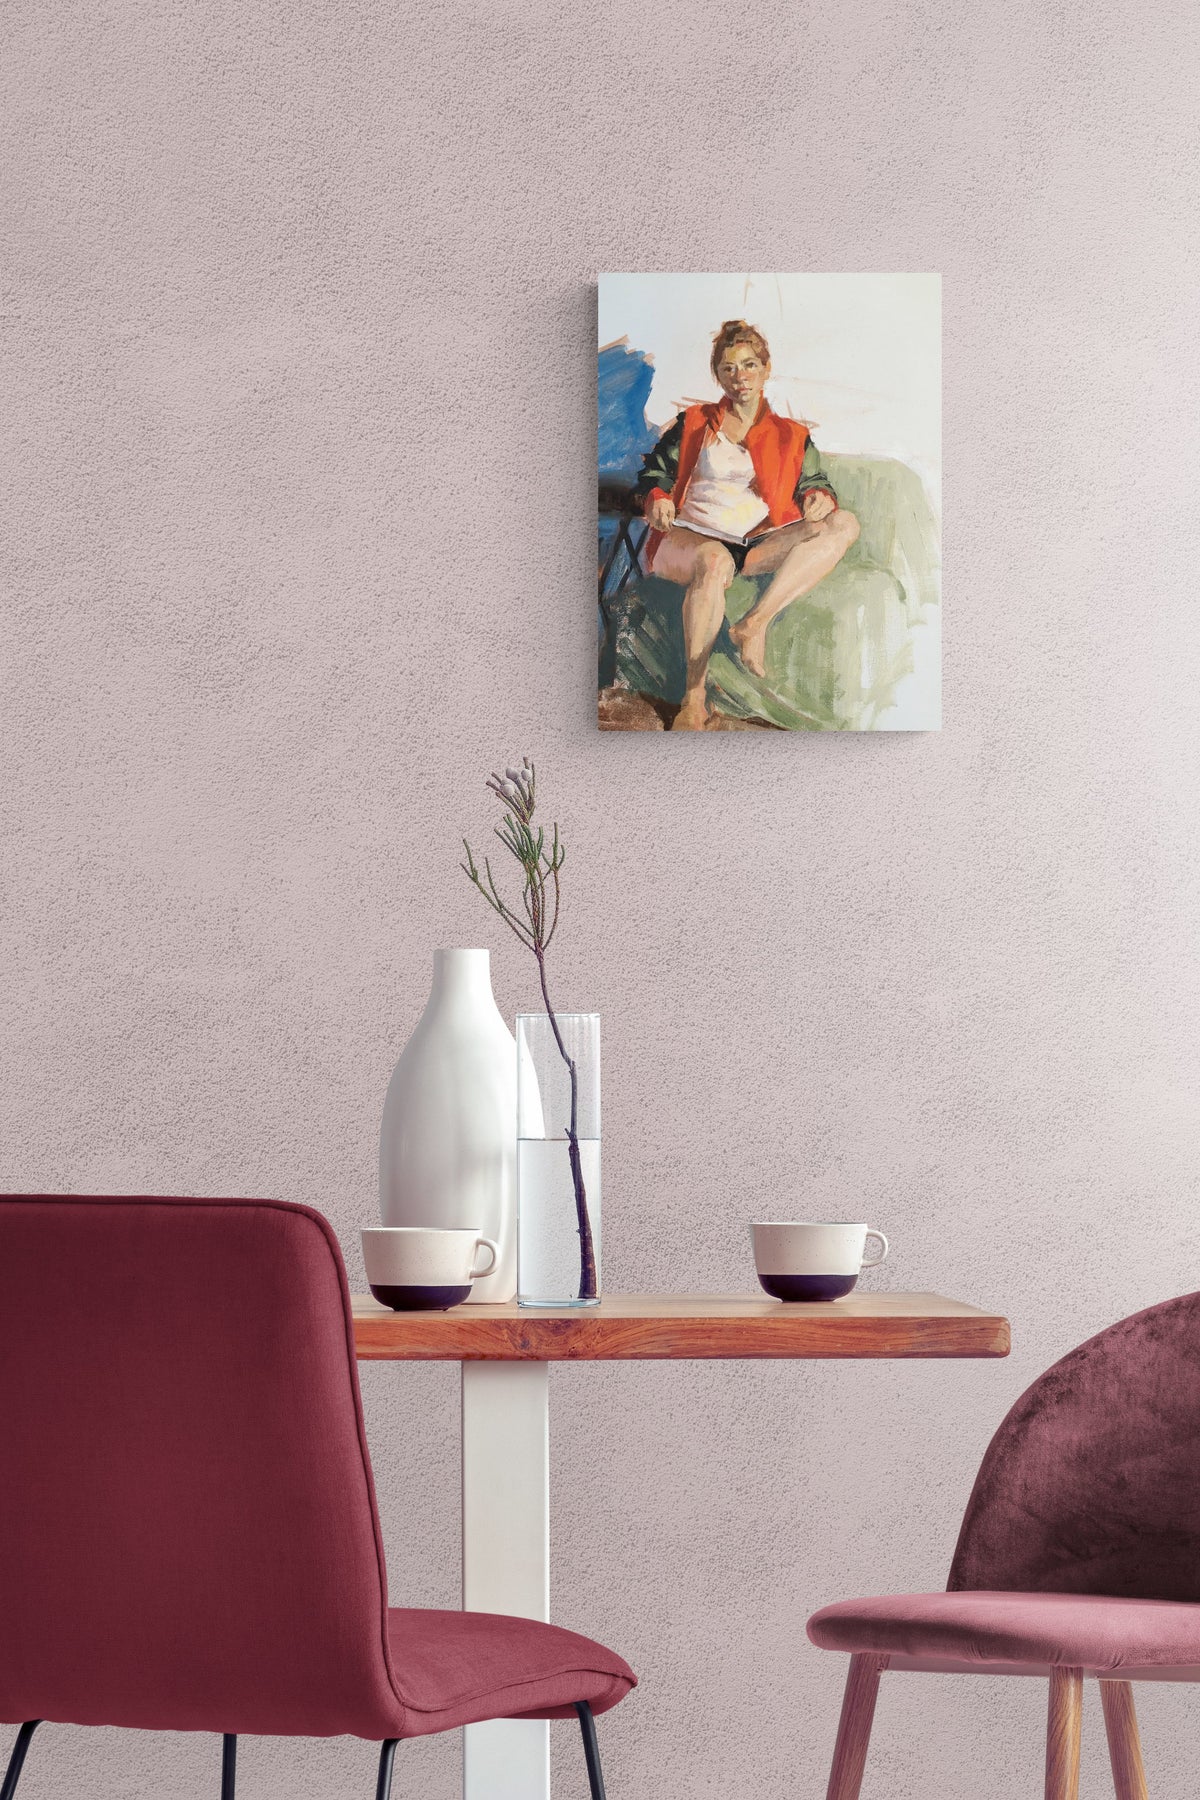 female figurative art with strong red and blue color draws tranquility to this kitchen area